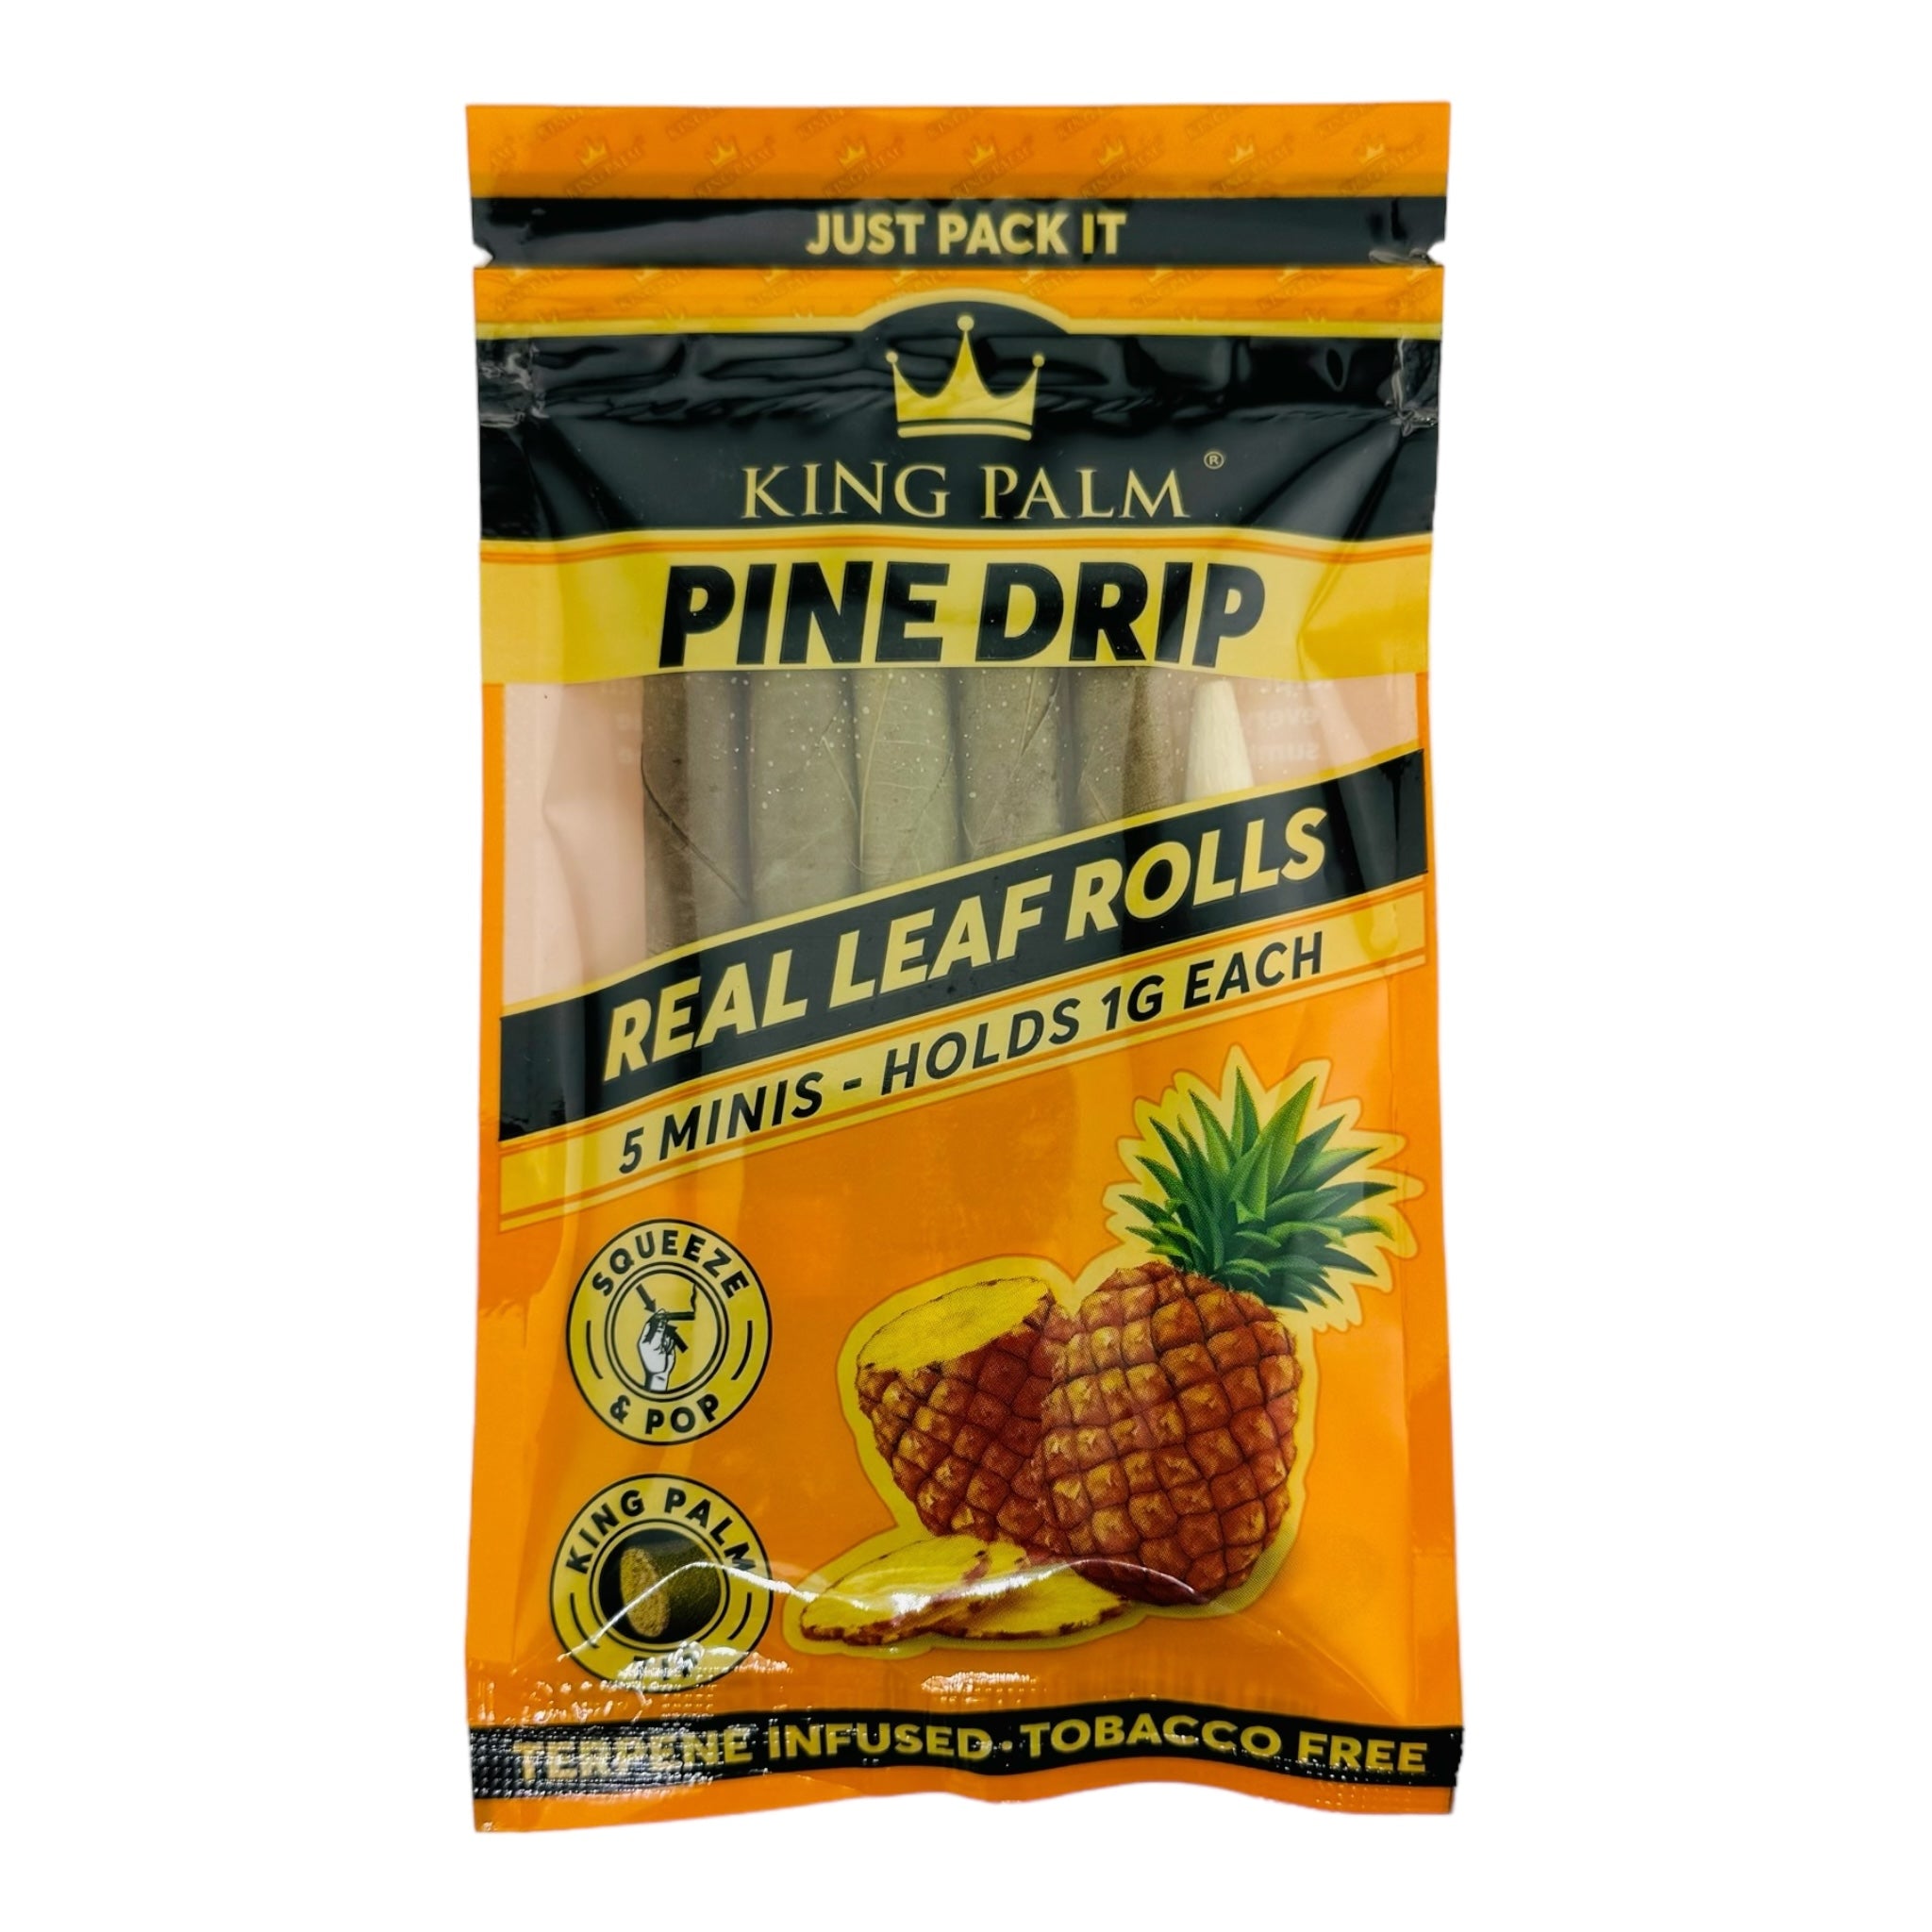 King Palm Pine Drip 5ct Mini Size blunt wrap cones for sale